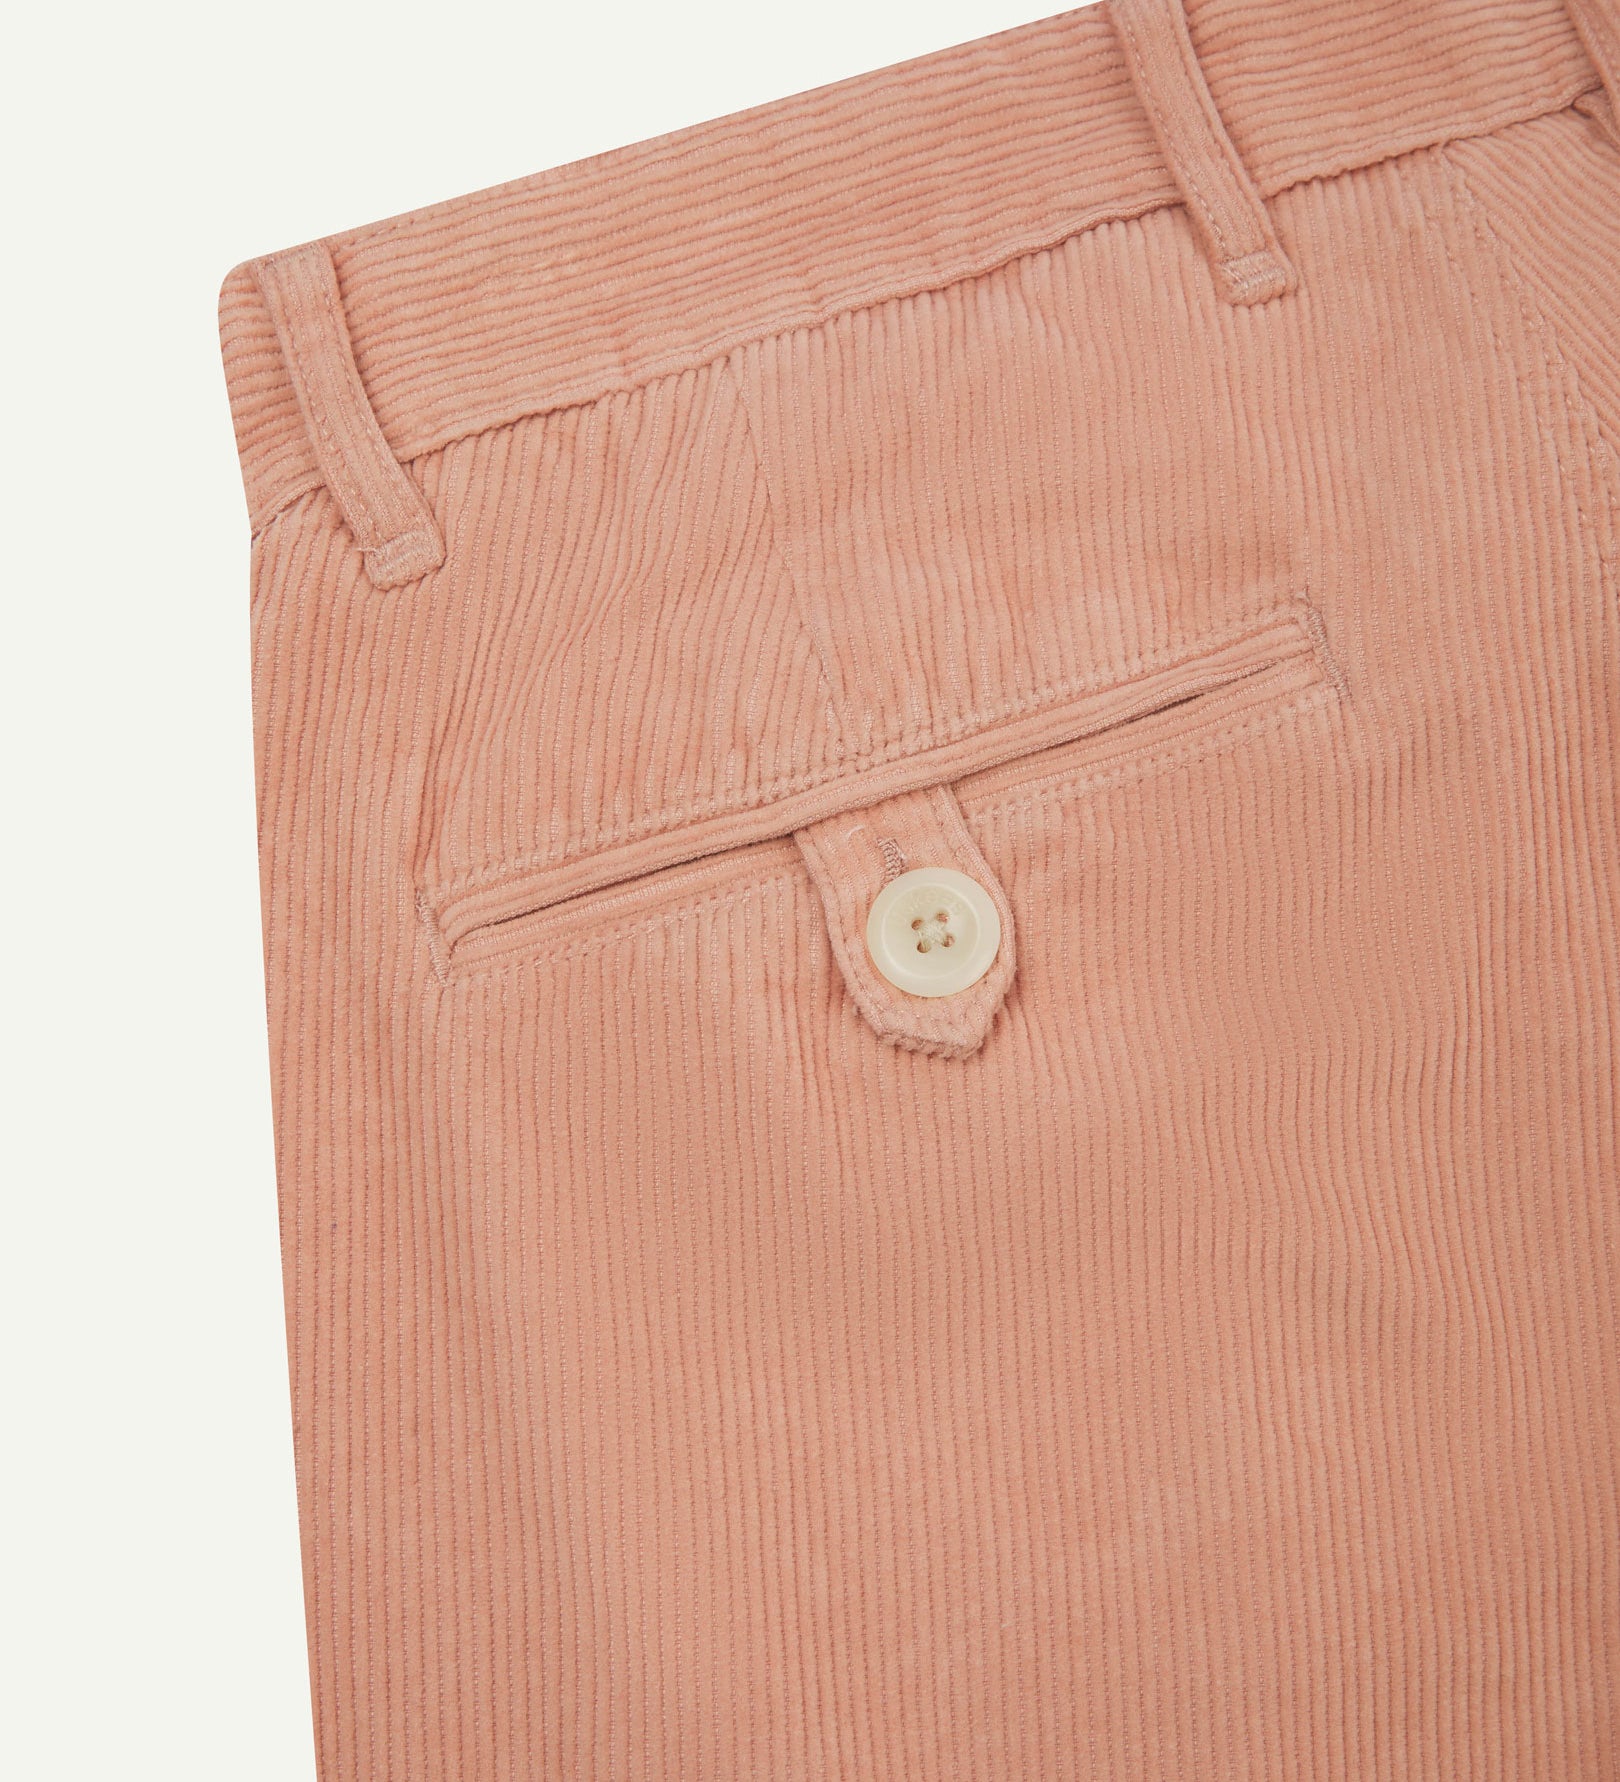 Close up back shot of Uskees 5018 cord boat pants in dusty pink with focus on neat back pocket secured with Corozo button and belt loops.